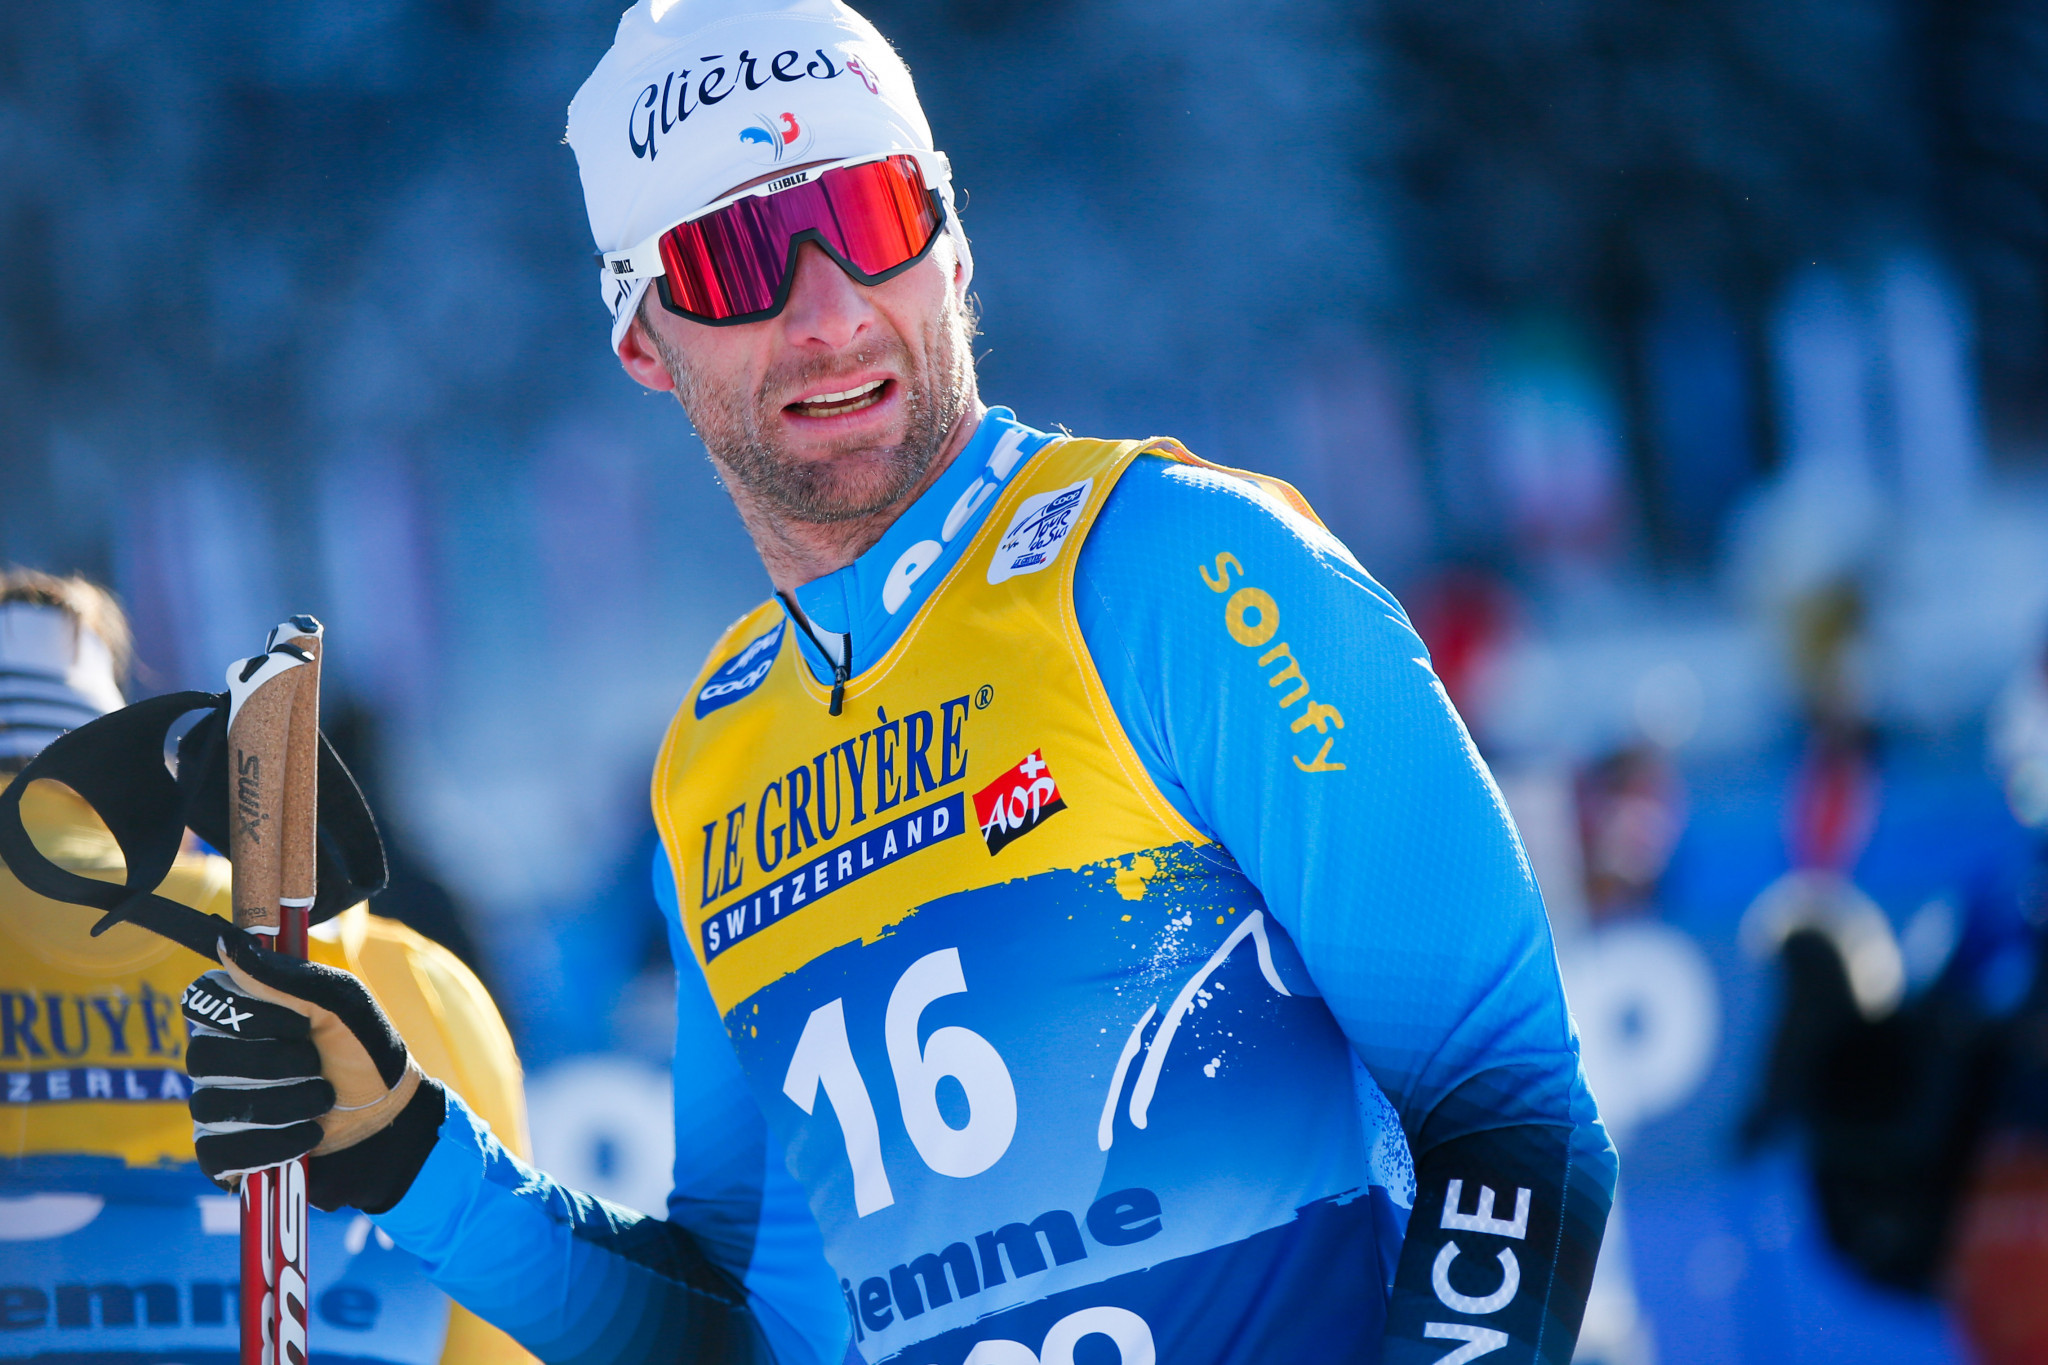 Olympic bronze medallist Gaillard announces retirement from cross-country skiing